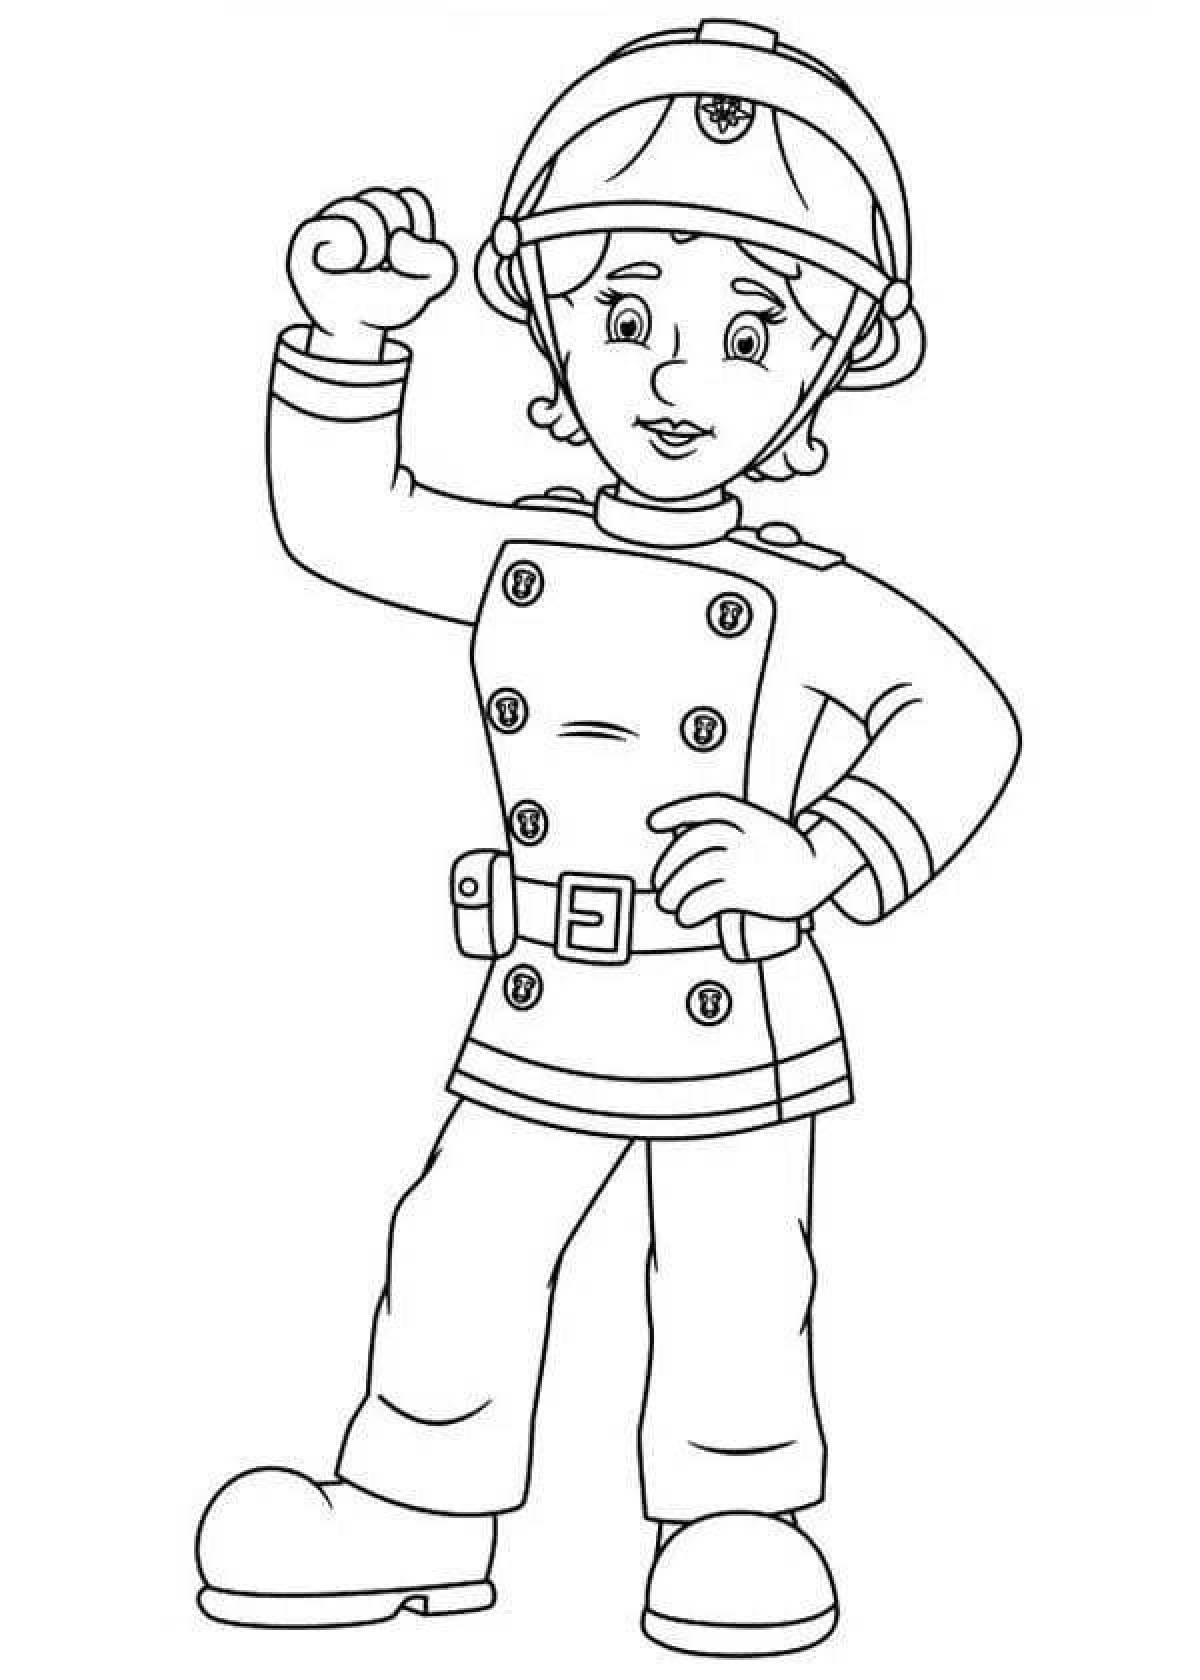 Coloring book intriguing firefighter profession